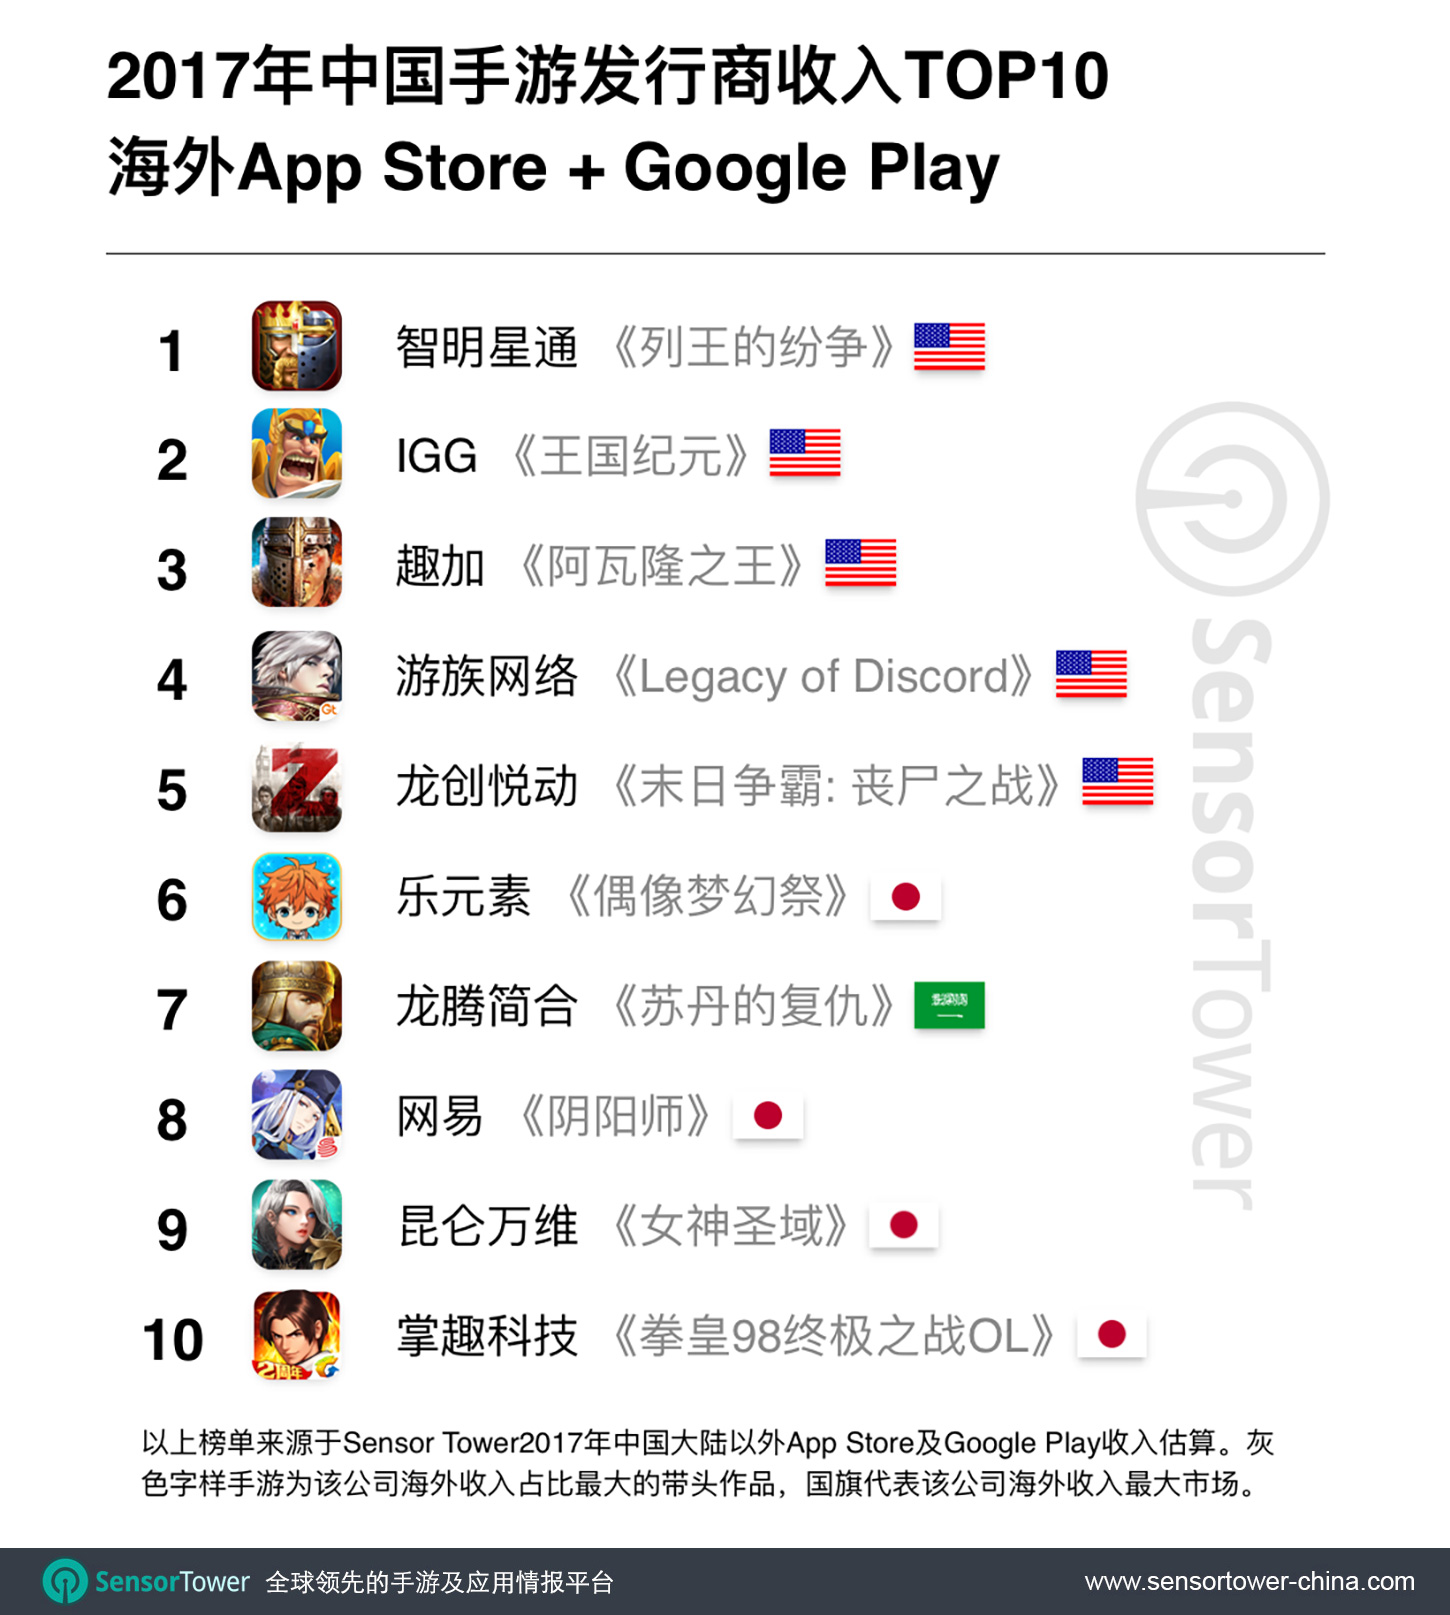 2017 Top 10 Grossing Chinese Mobile Game Publishers Outside China